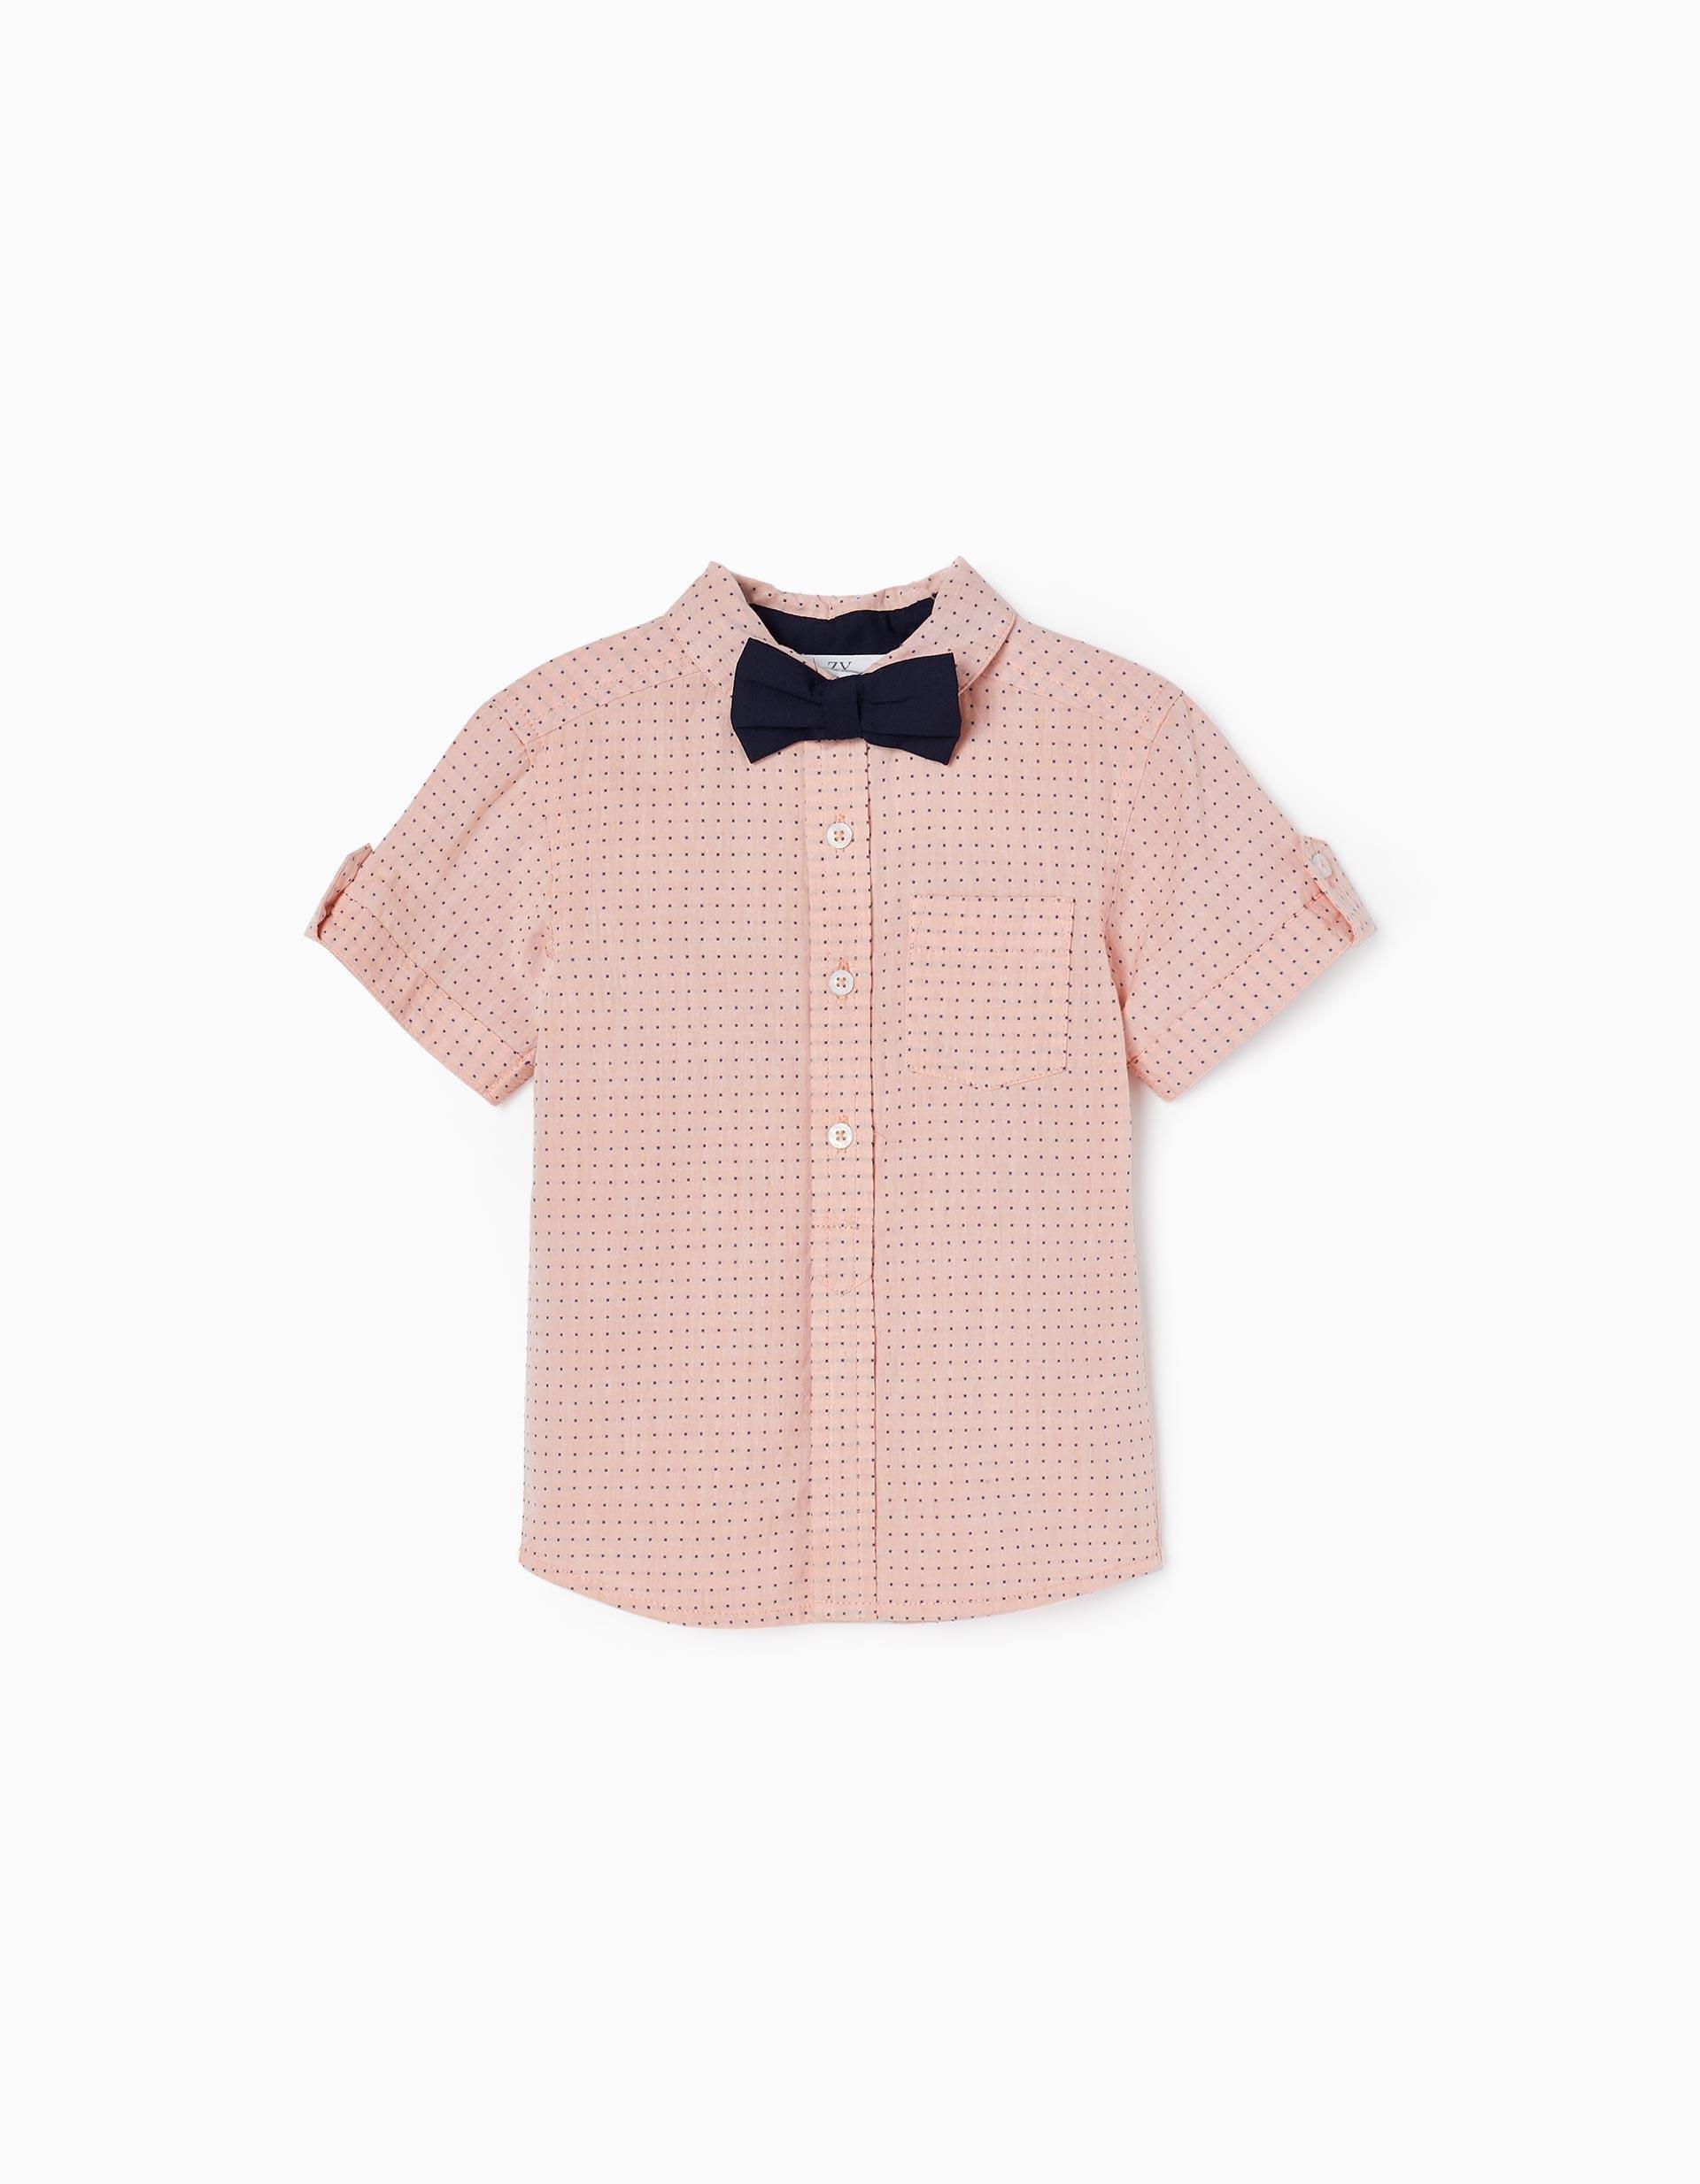 Zippy - Pink Shirt With Bow Tie, Baby Boys